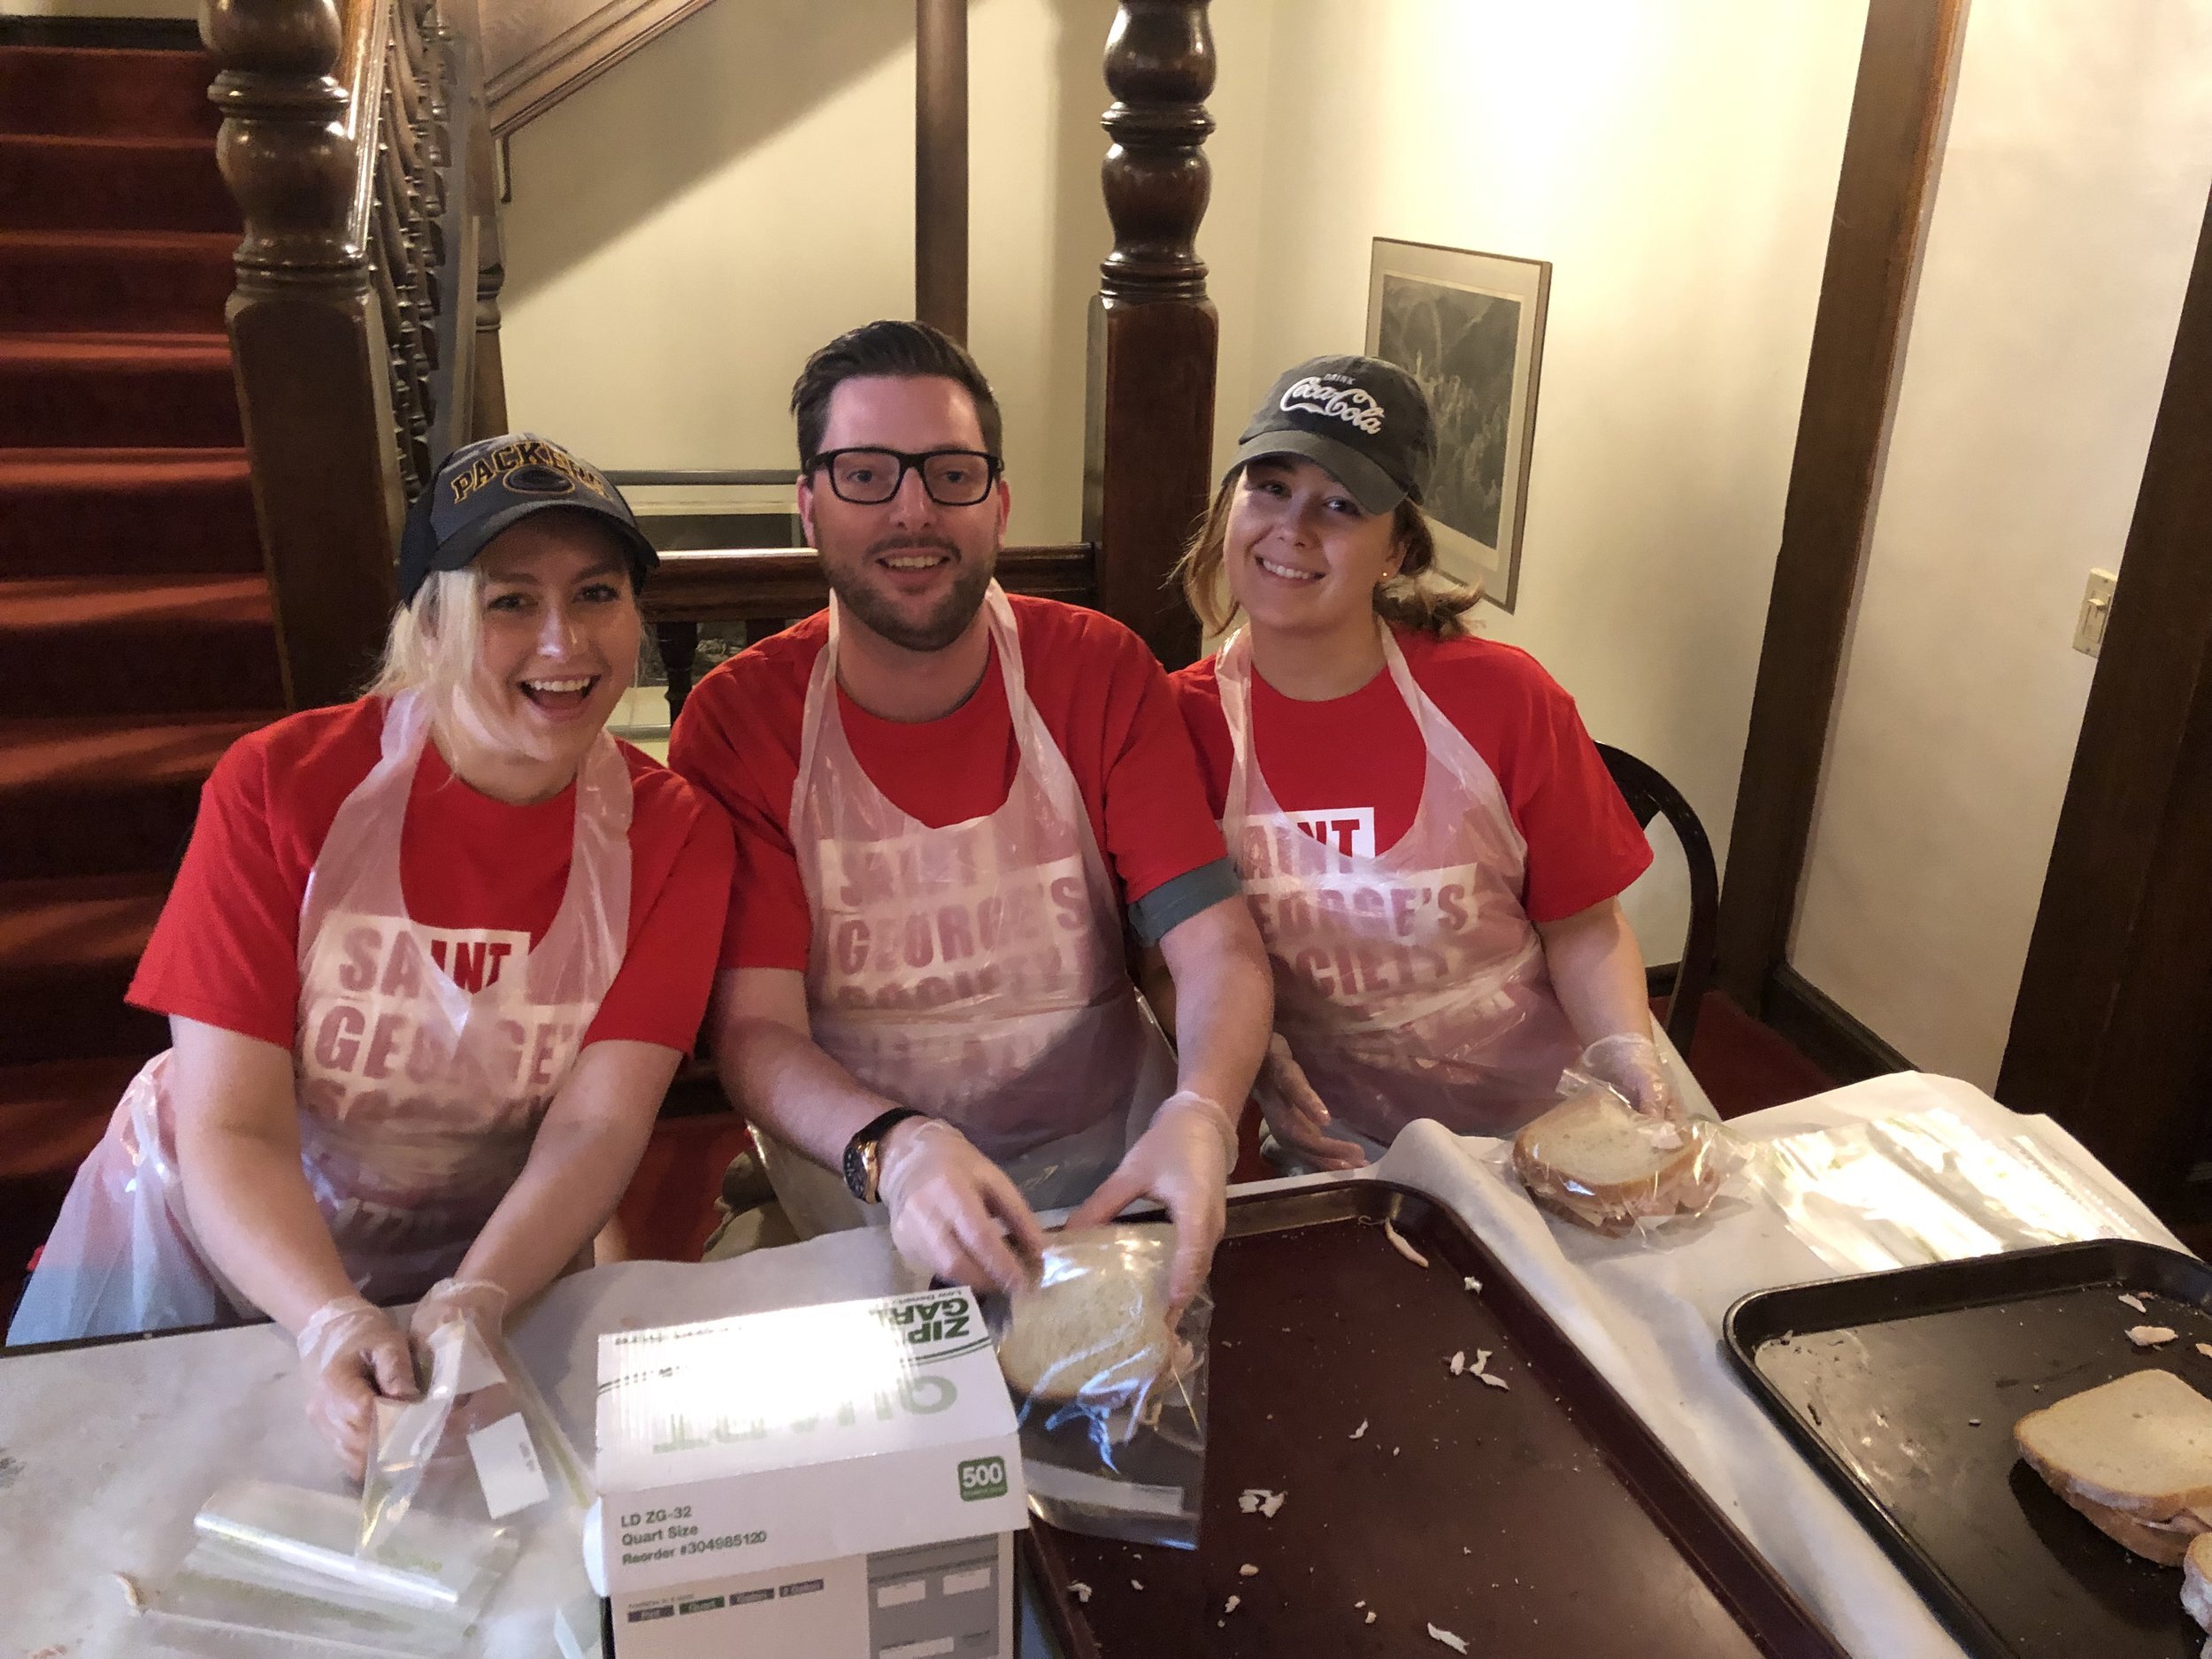  We continued our St. George’s Gives Back program which provides opportunities for members to give back to the local community. One of which is to help in the Saint Thomas Church soup kitchen and distribute food to the homeless. 